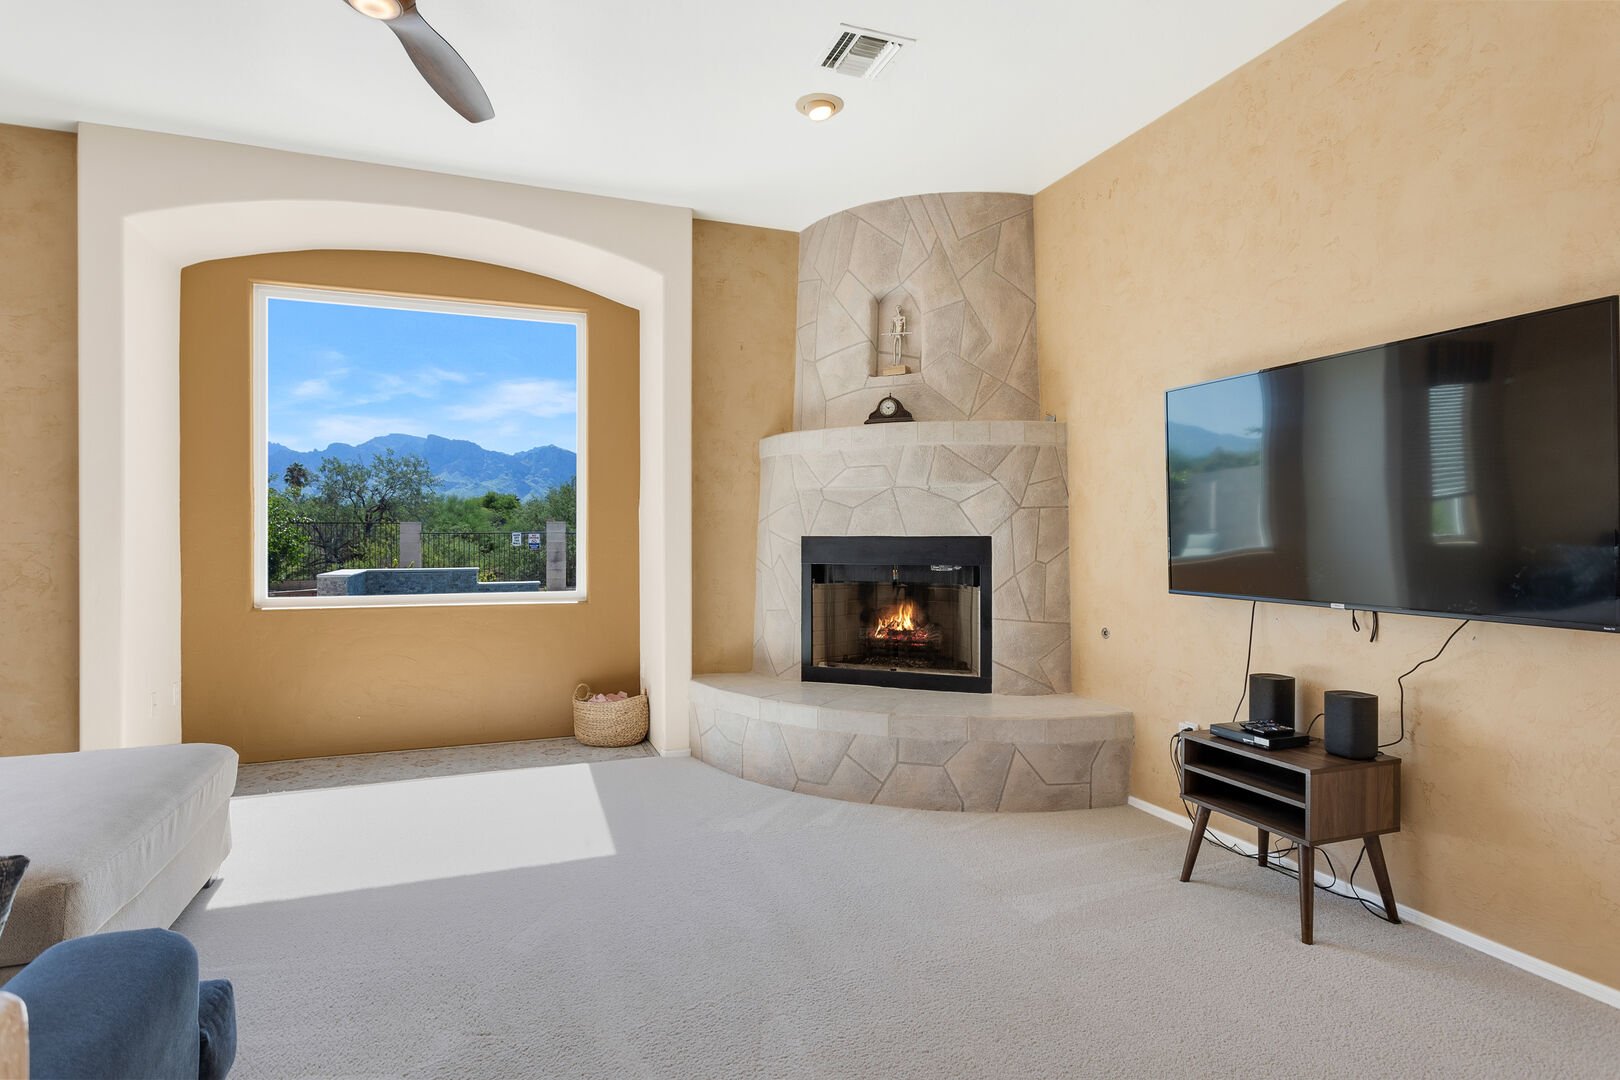 Relaxing gas fireplace with stunning views